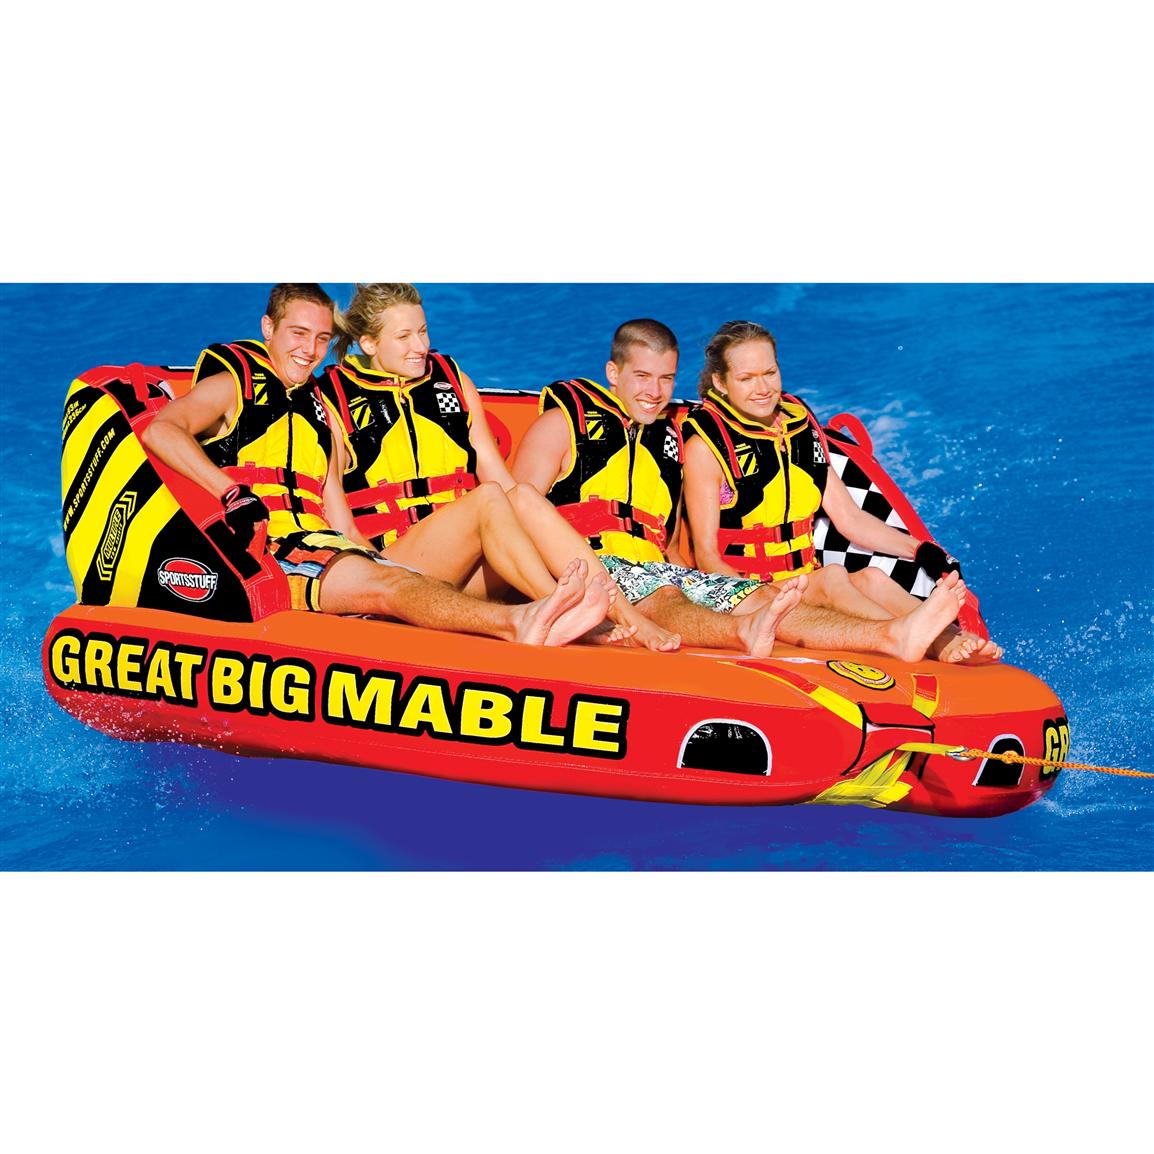 Sportsstuff® Great Big Mable 4-person Towable